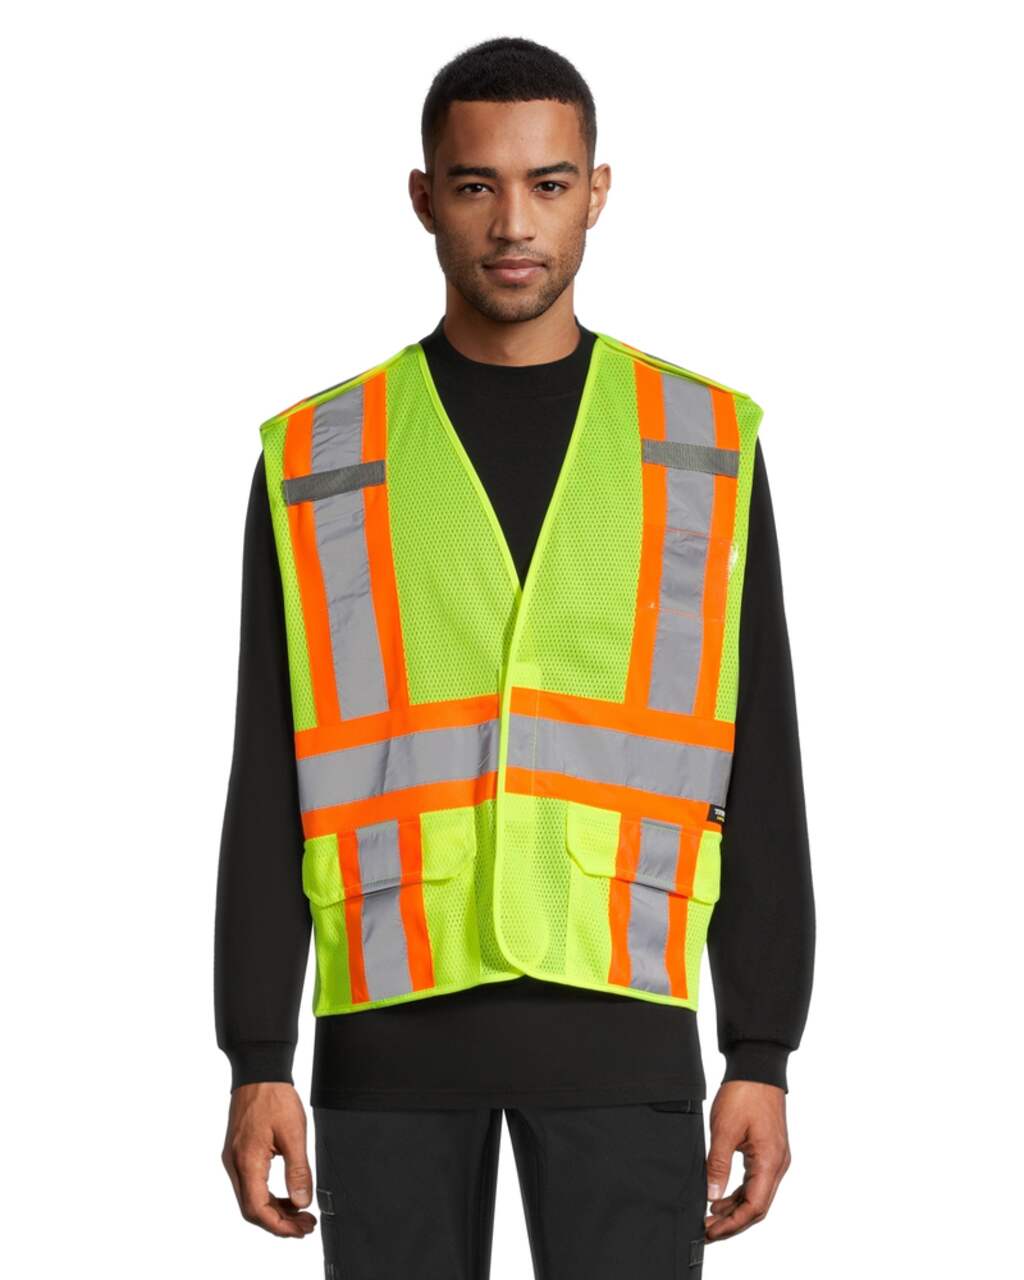 Mesh Vest, High Visibility Yellow, Level 2, Clear Pocket, Dot Striping